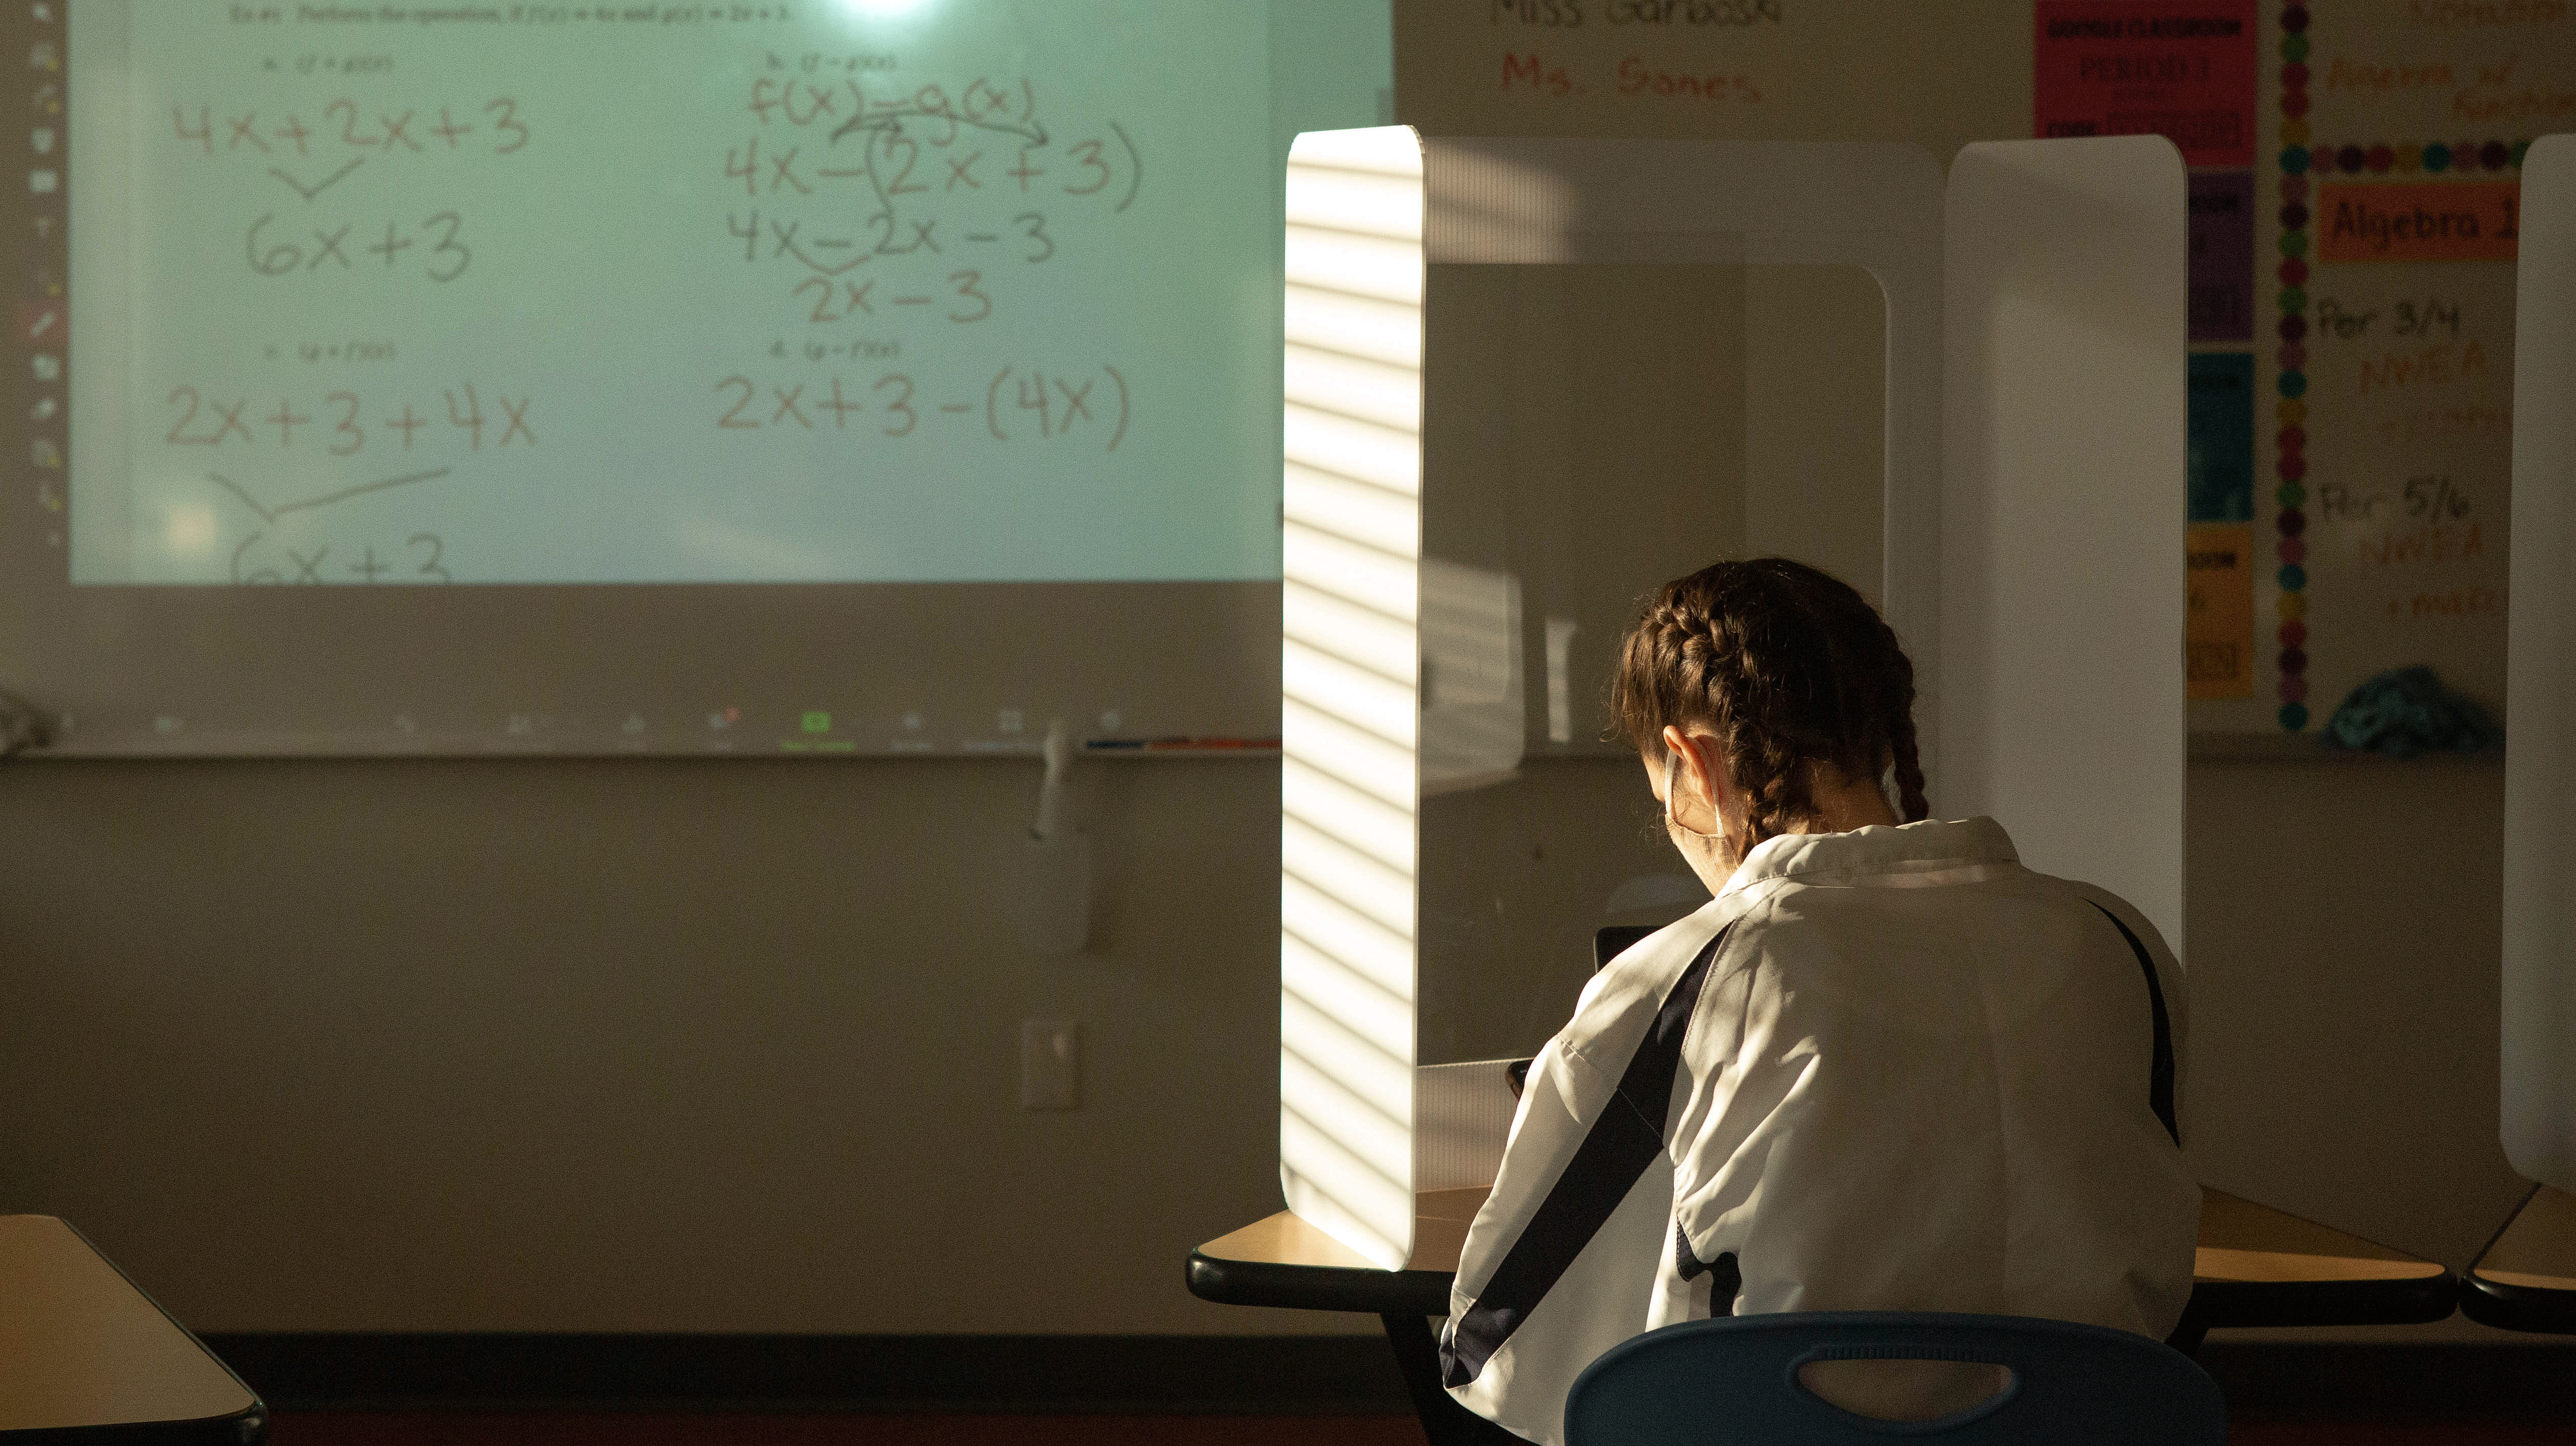 A young woman student in a darkened math class, looking trhough a protective screen at the calculations on a whiteboard